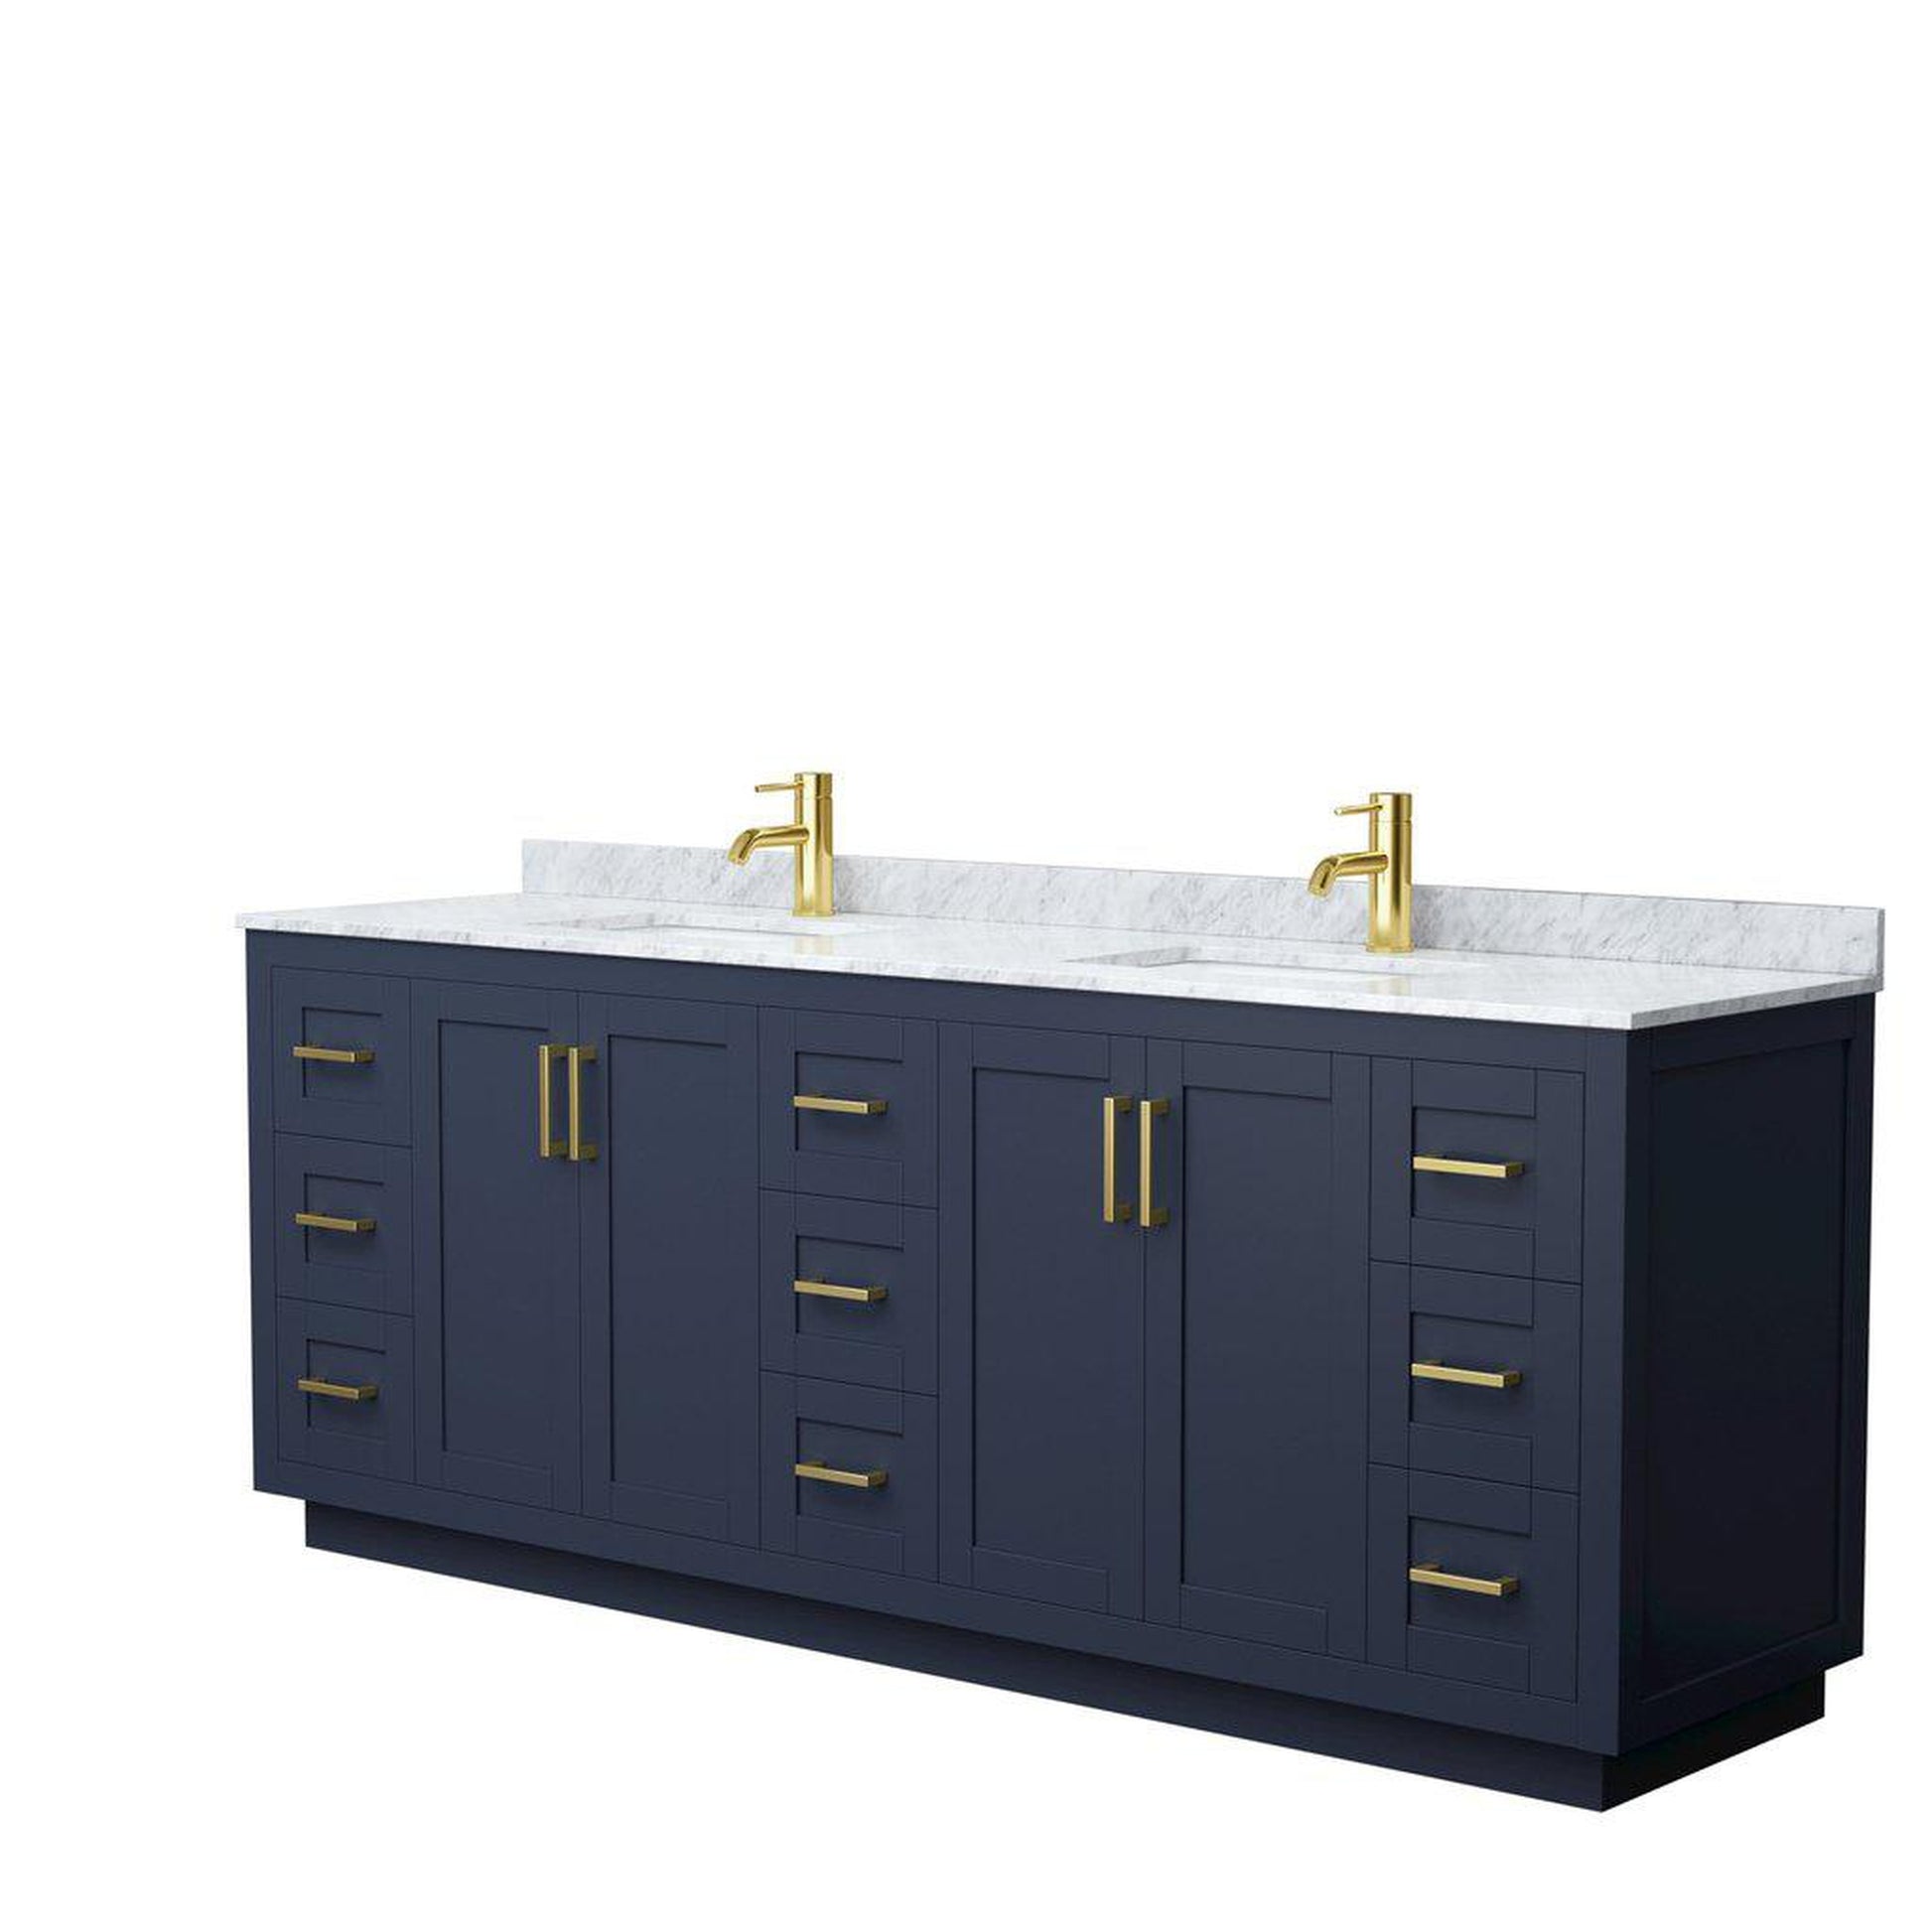 Wyndham Collection Miranda 84" Double Bathroom Dark Blue Vanity Set With White Carrara Marble Countertop, Undermount Square Sink, And Brushed Gold Trim